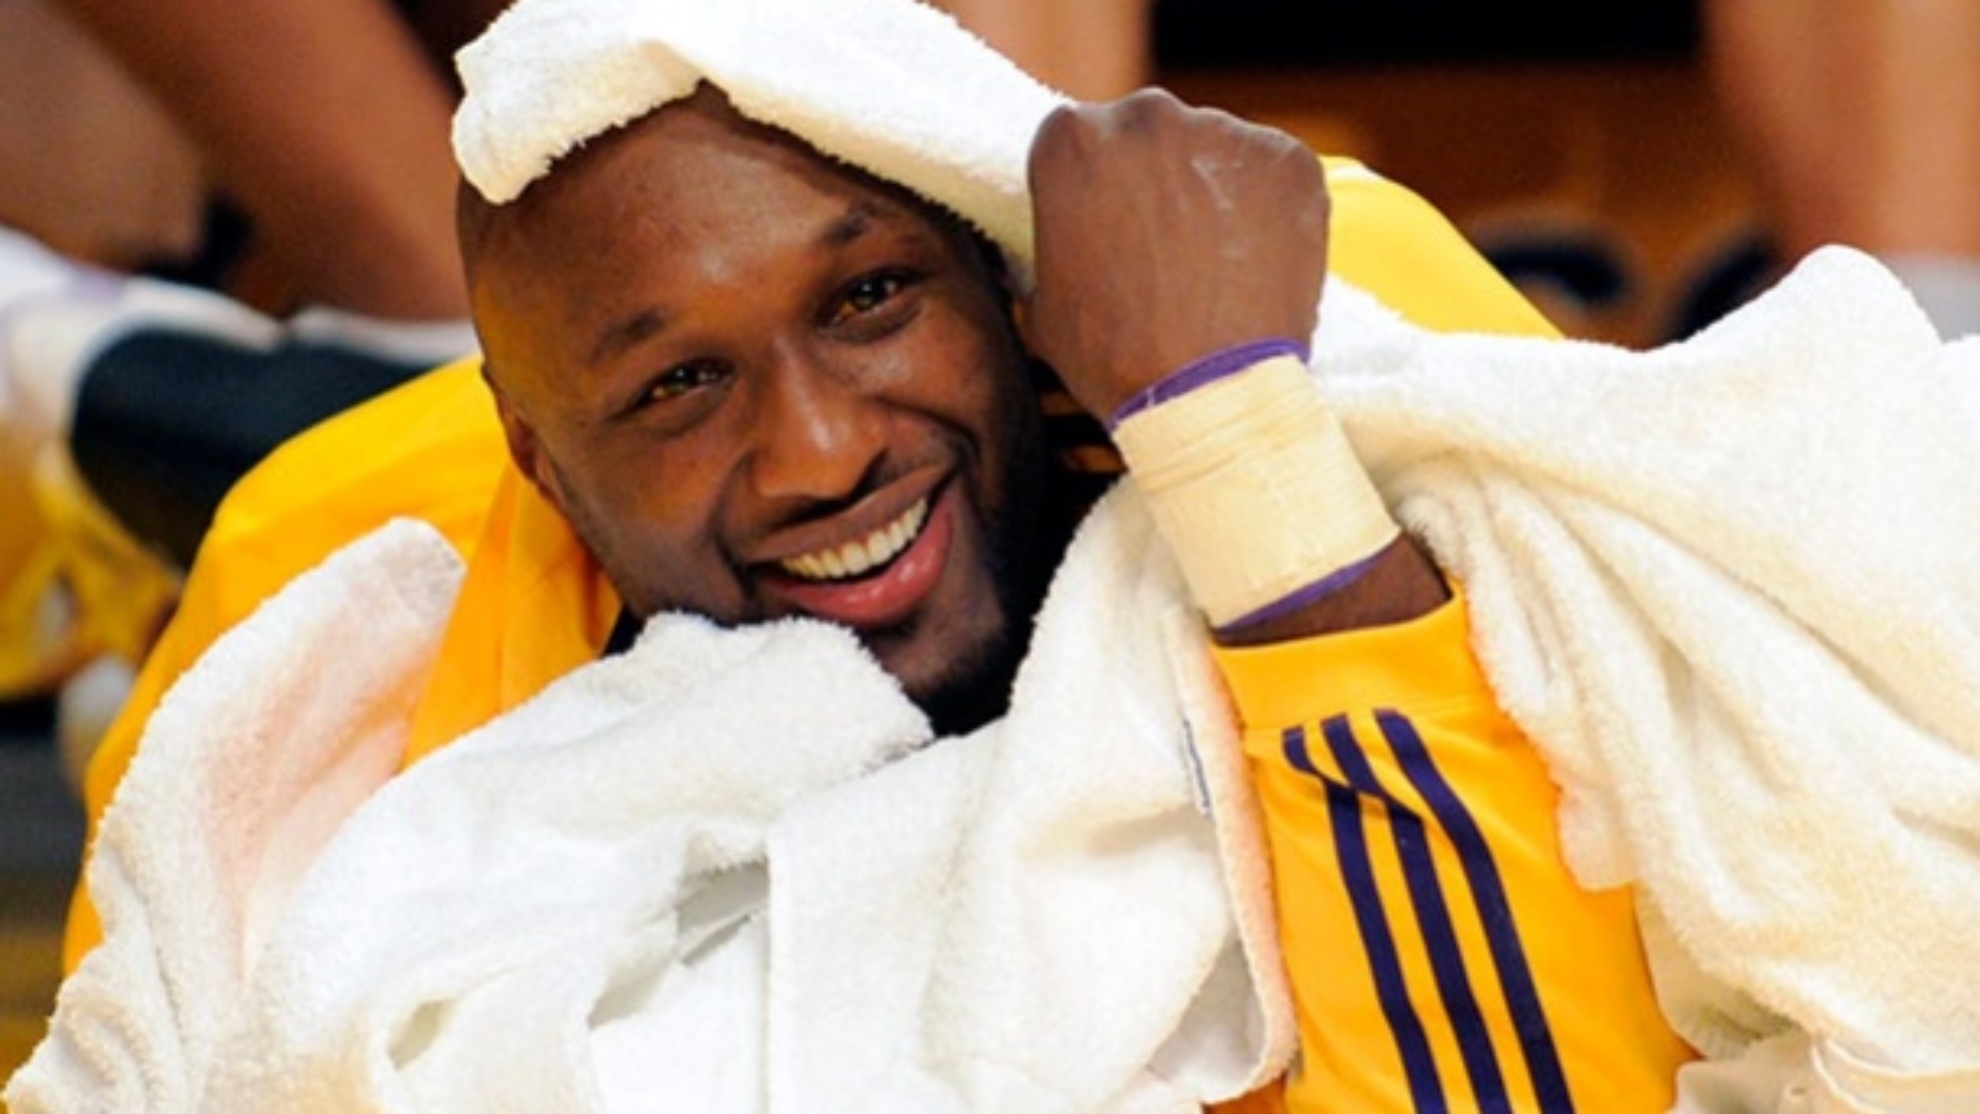 Where is lamar odom today